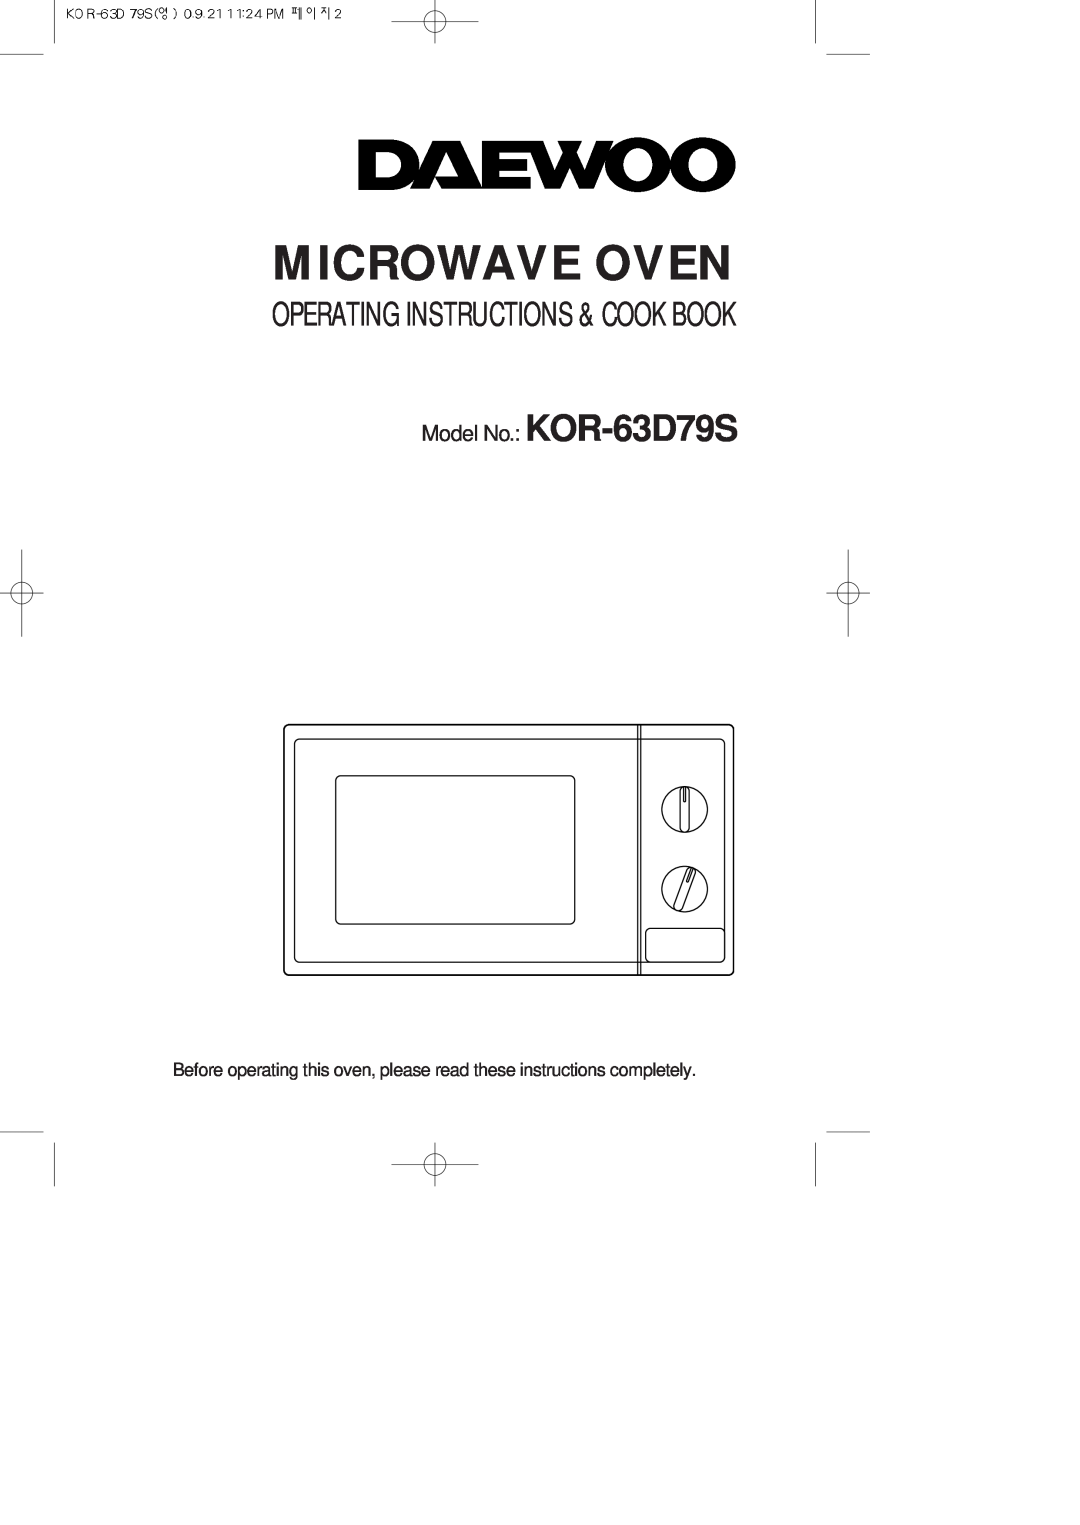 Daewoo manual Microwave Oven, Operating Instructions & Cook Book, Model No. KOR-63D79S 